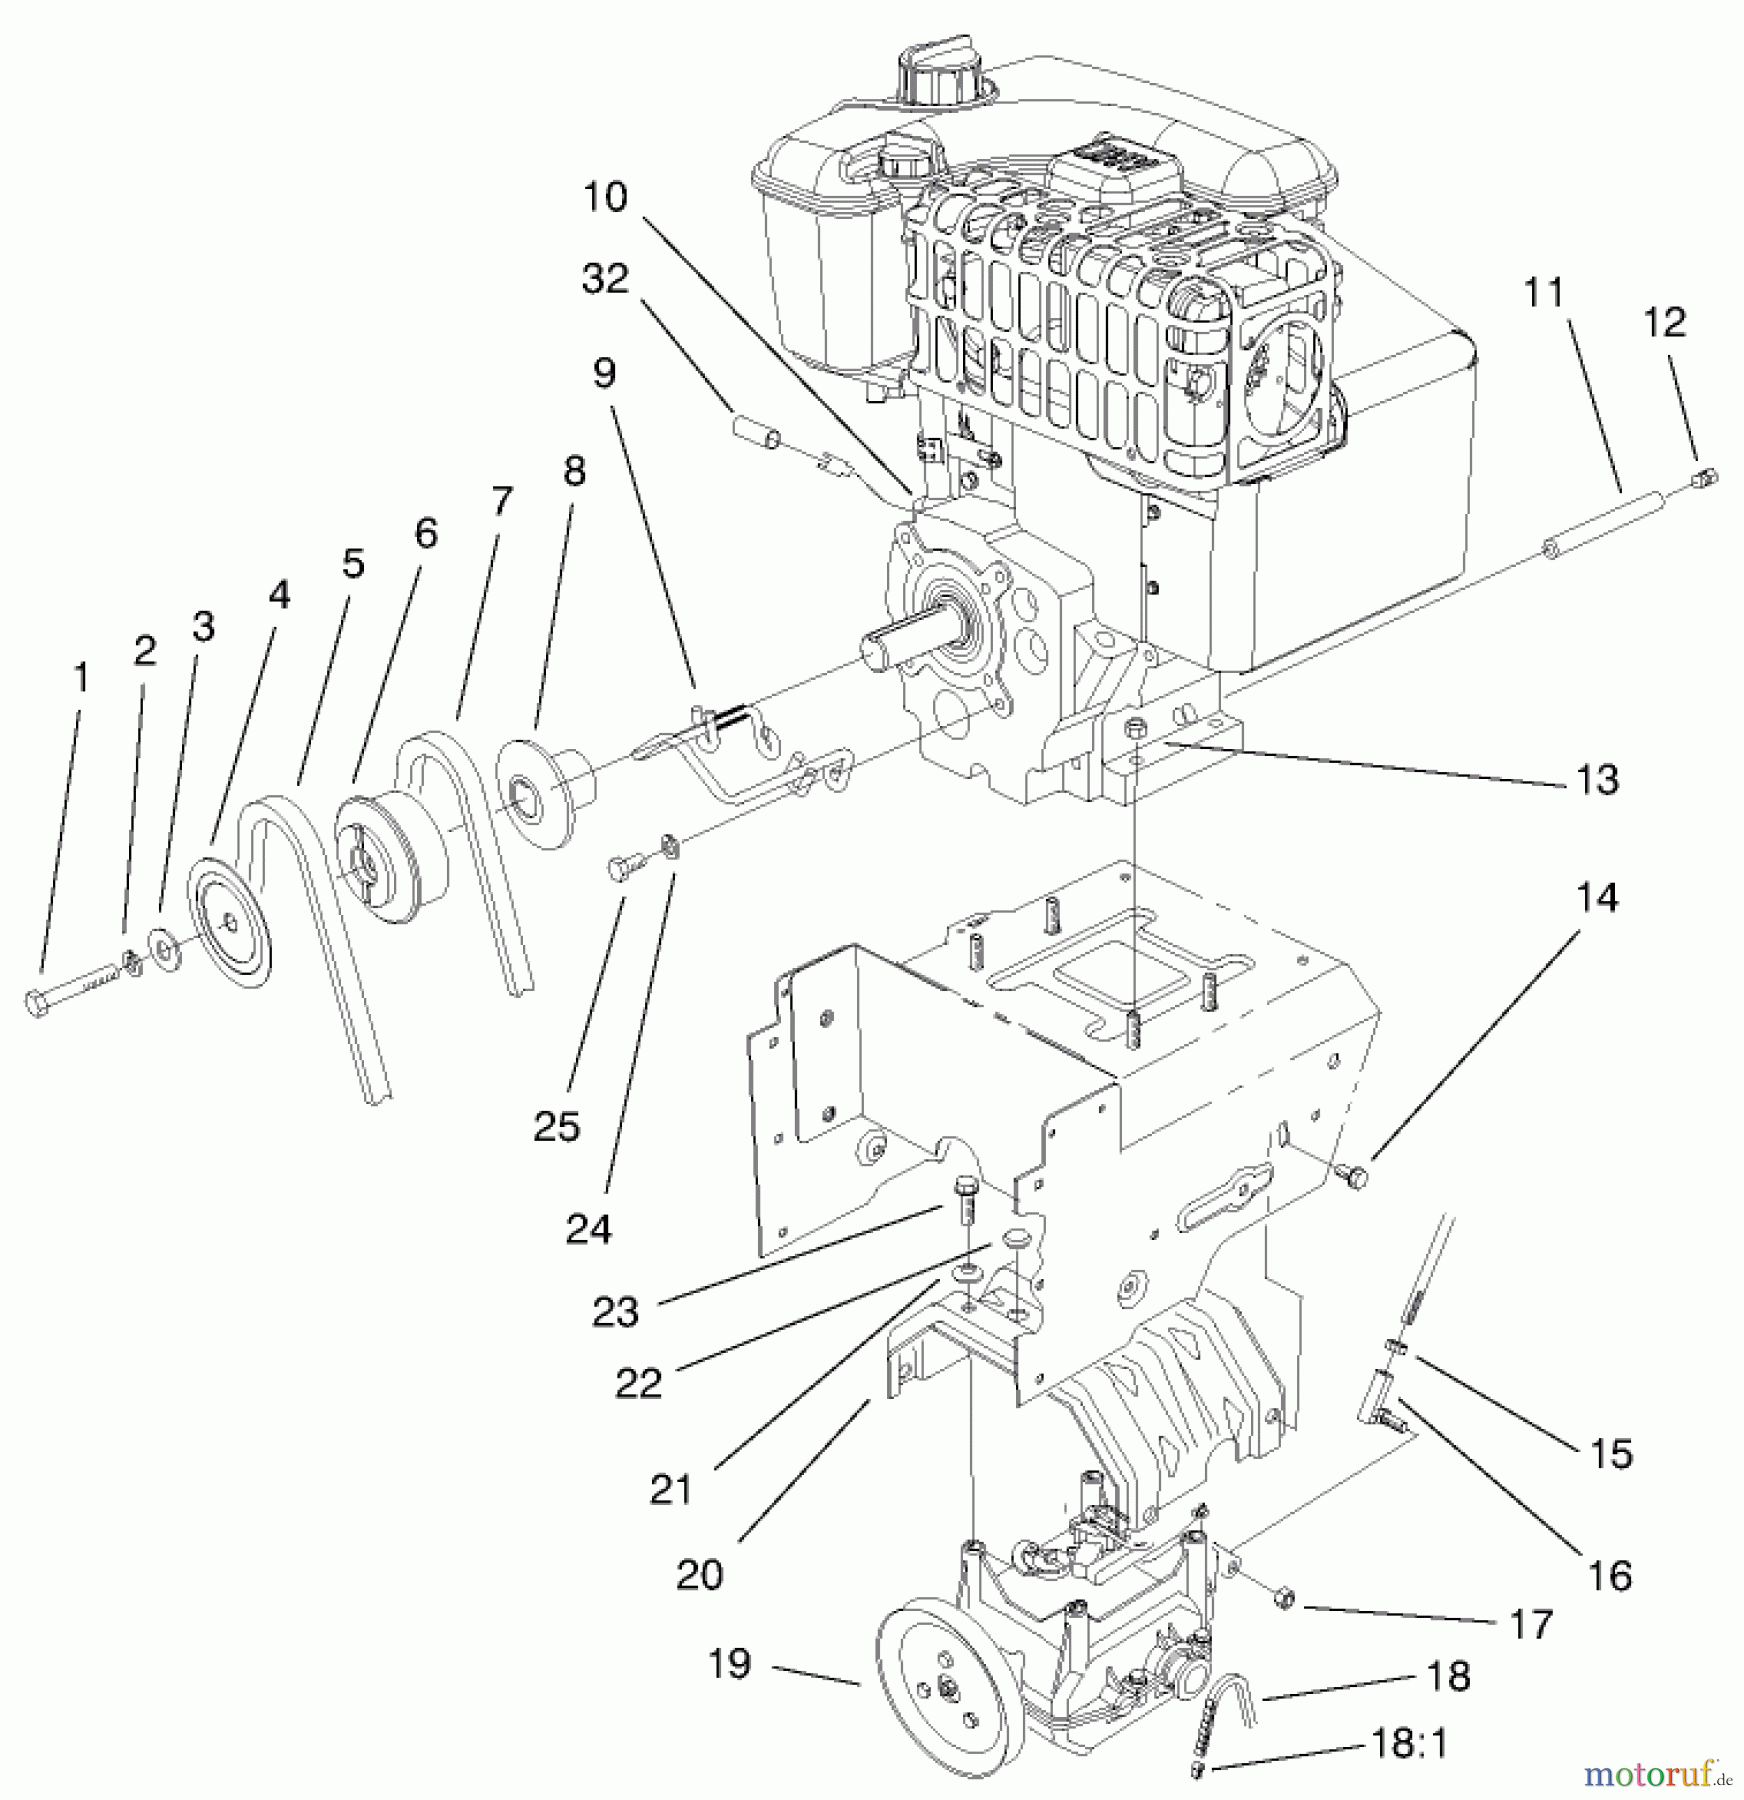  Toro Neu Snow Blowers/Snow Throwers Seite 1 38560 (1028) - Toro 1028 Power Shift Snowthrower, 2000 (200000001-200999999) ENGINE AND TRANSMISSION ASSEMBLY